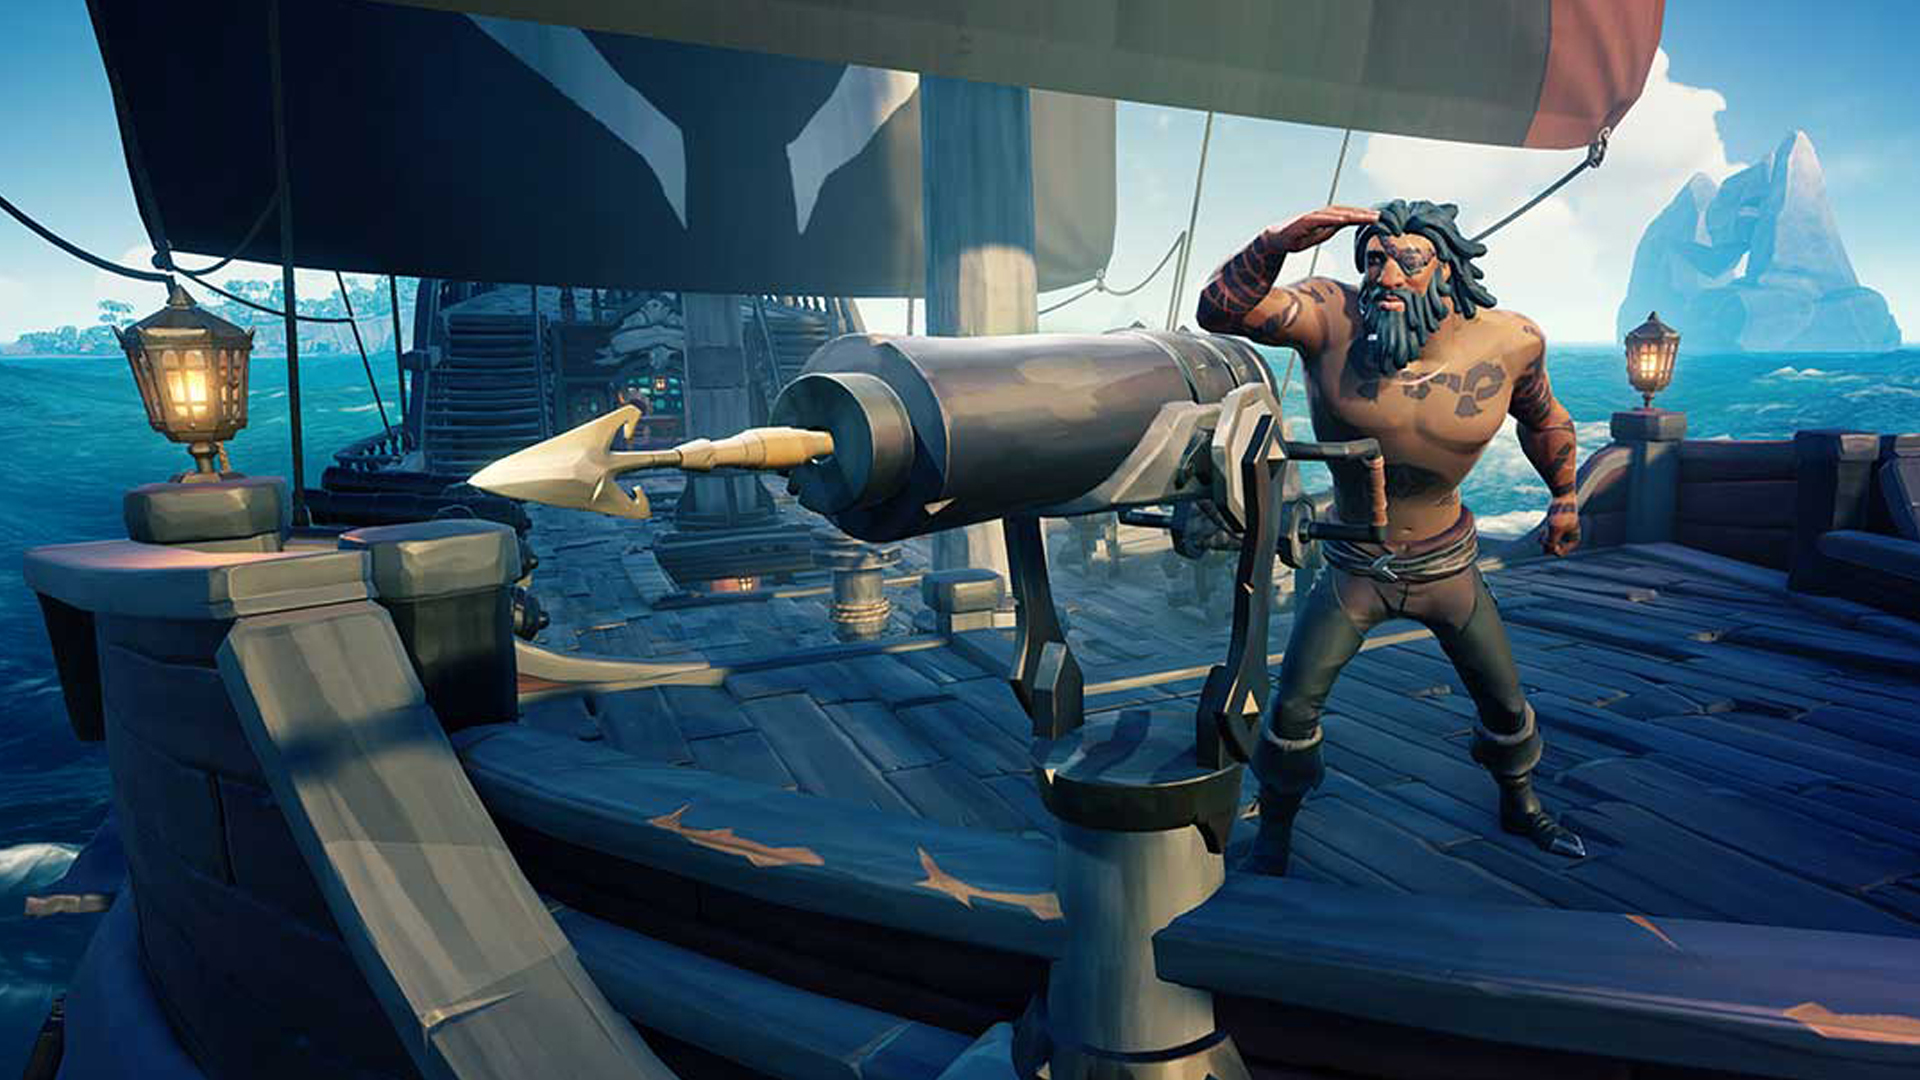 Where to Find the Prison Cell Key in Sea of Thieves